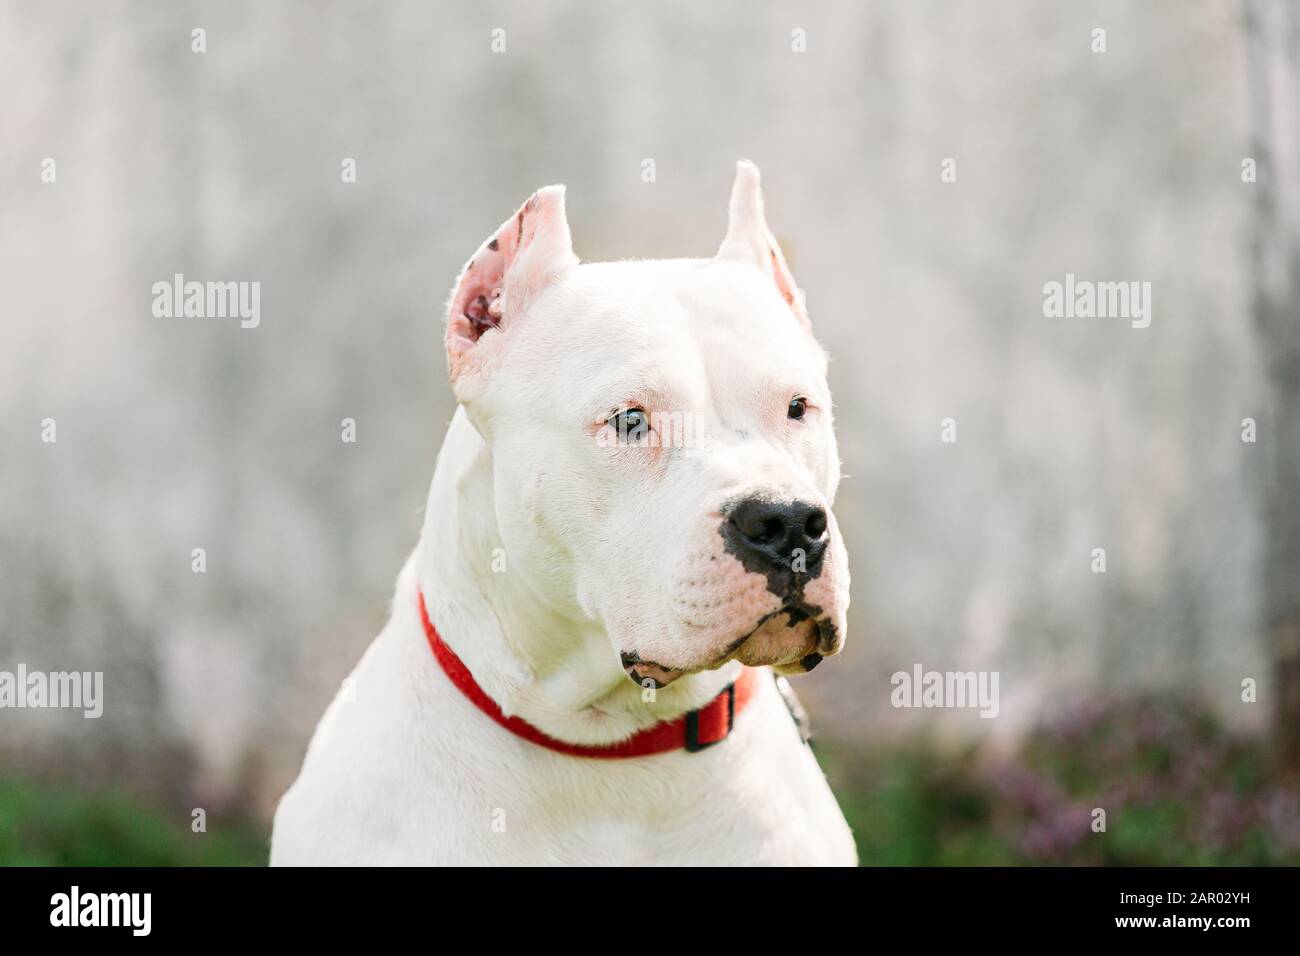 https://c8.alamy.com/comp/2AR02YH/white-dog-of-dogo-argentino-also-known-as-the-argentine-mastiff-is-a-large-white-muscular-dog-that-was-developed-in-argentina-primarily-for-purpose-2AR02YH.jpg